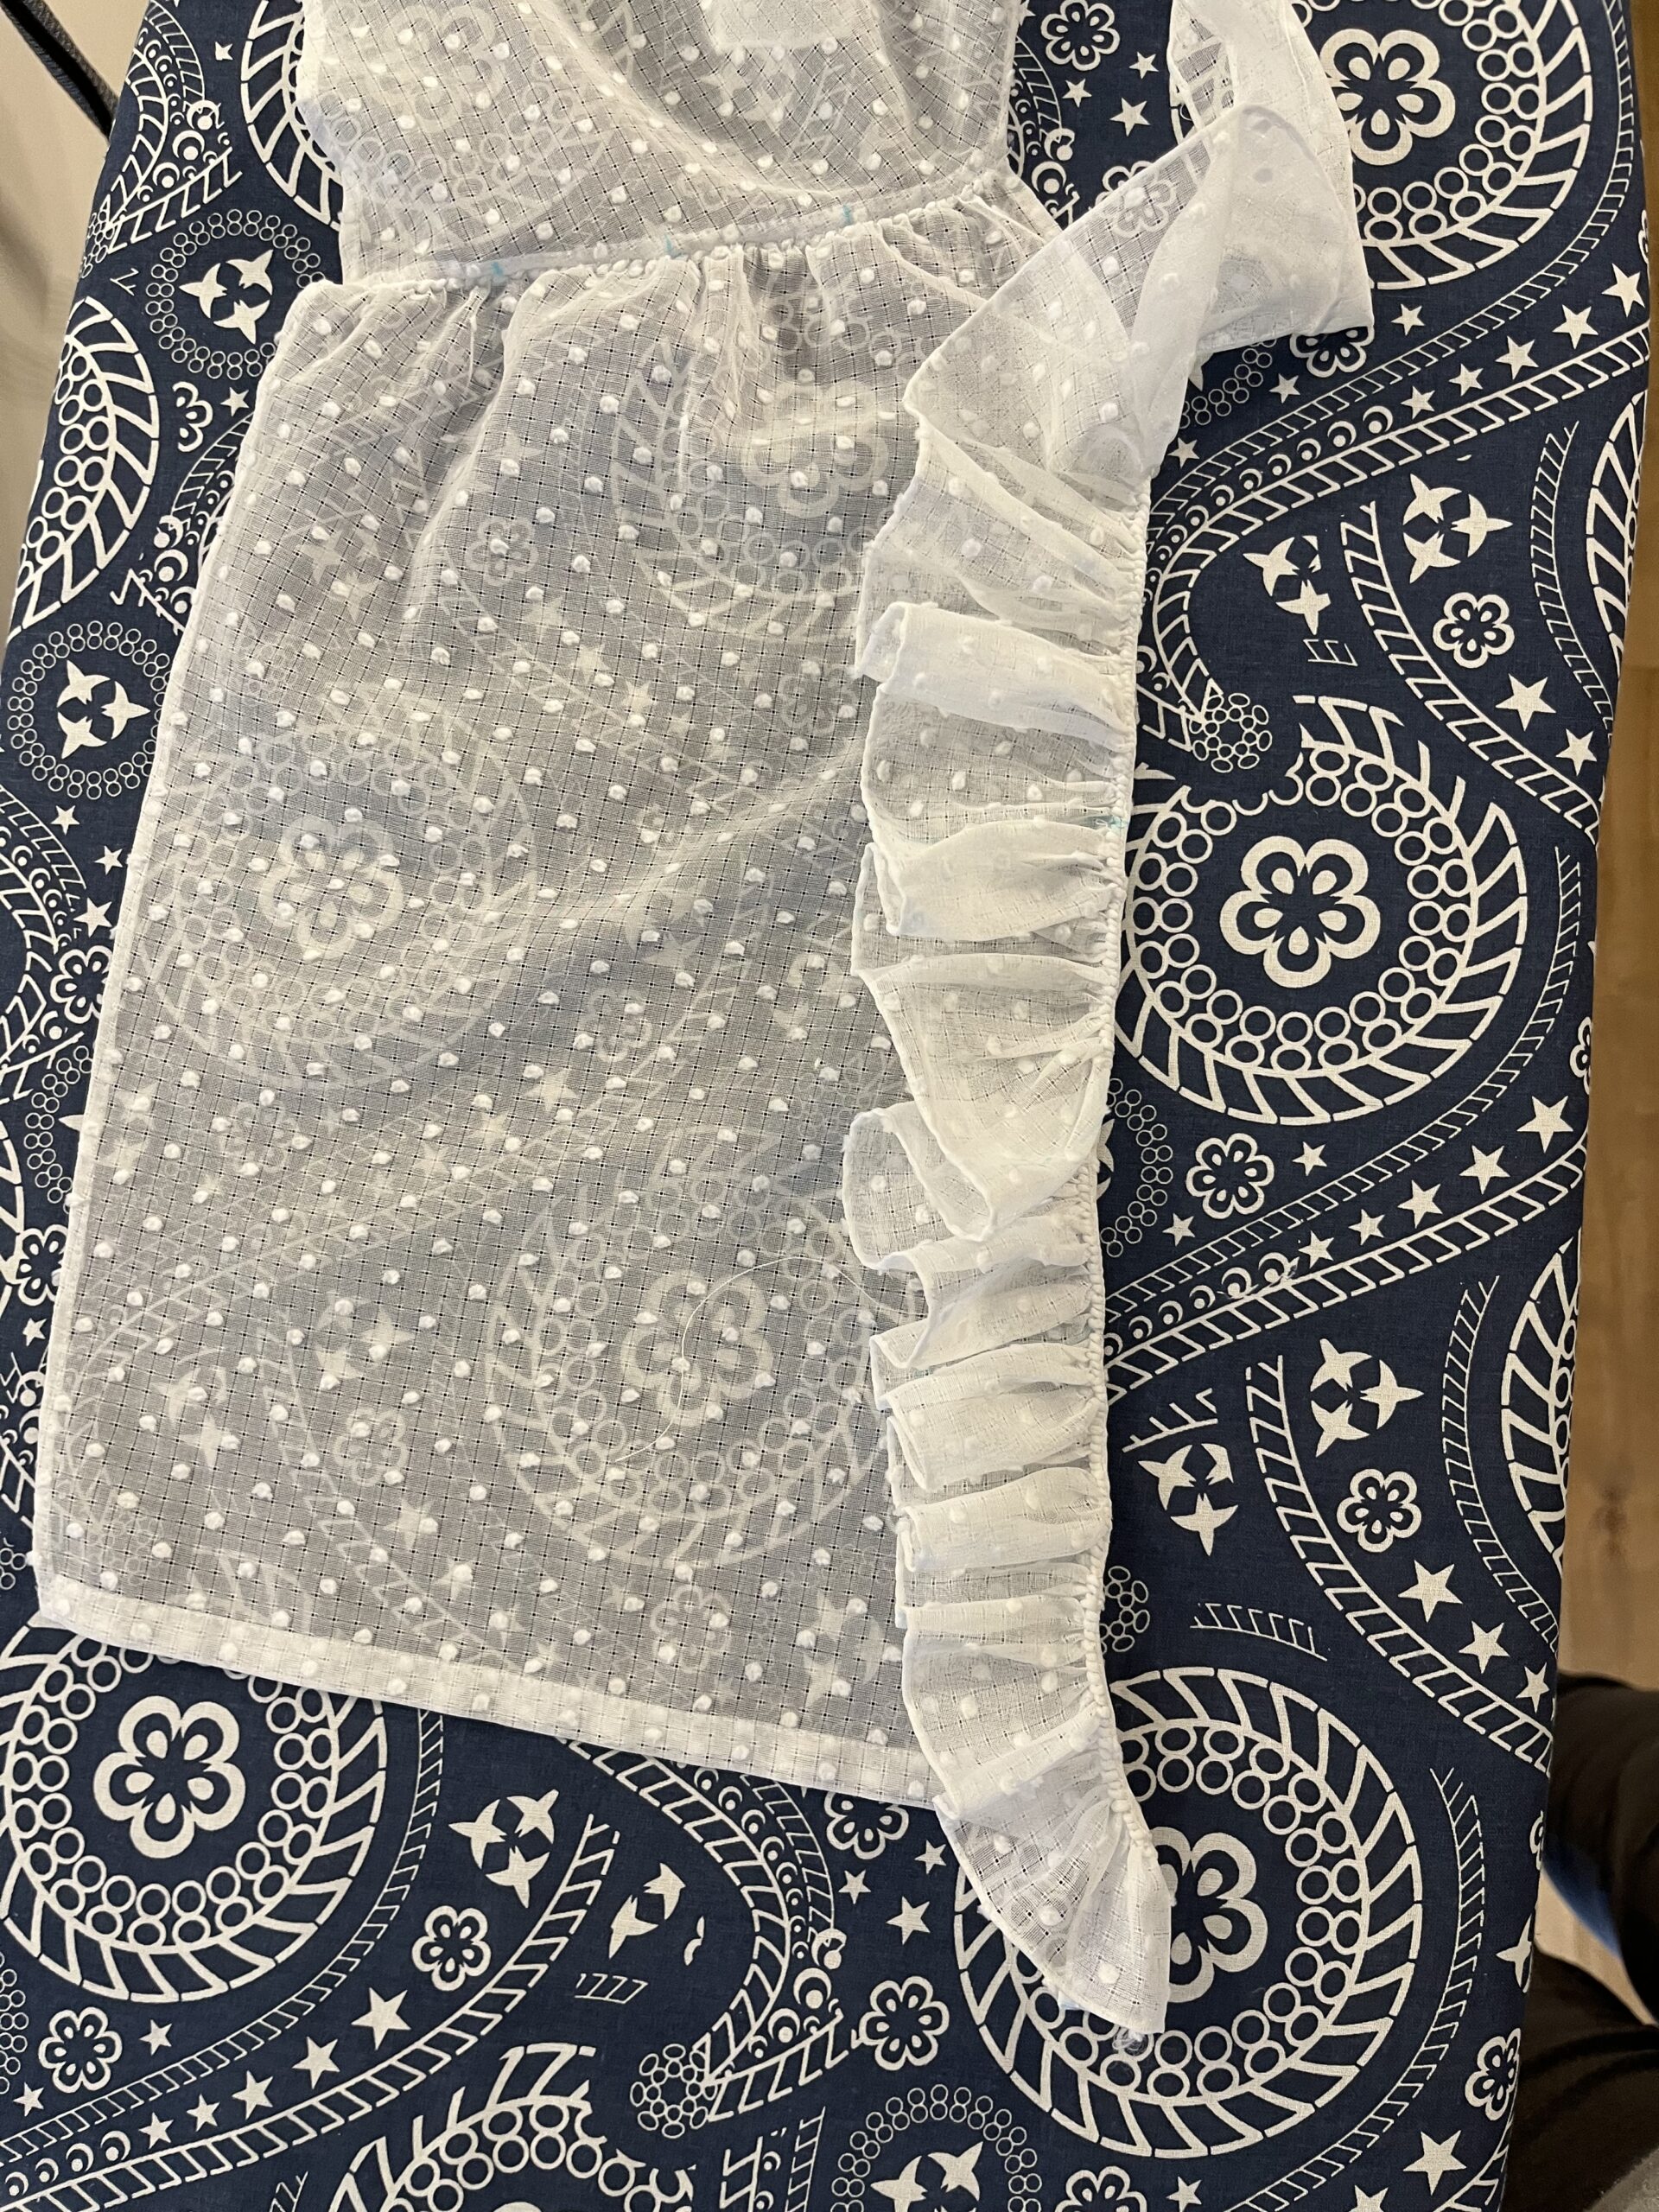 A 1790s ruffled chemisette in progress - half of the ruffle has been attached